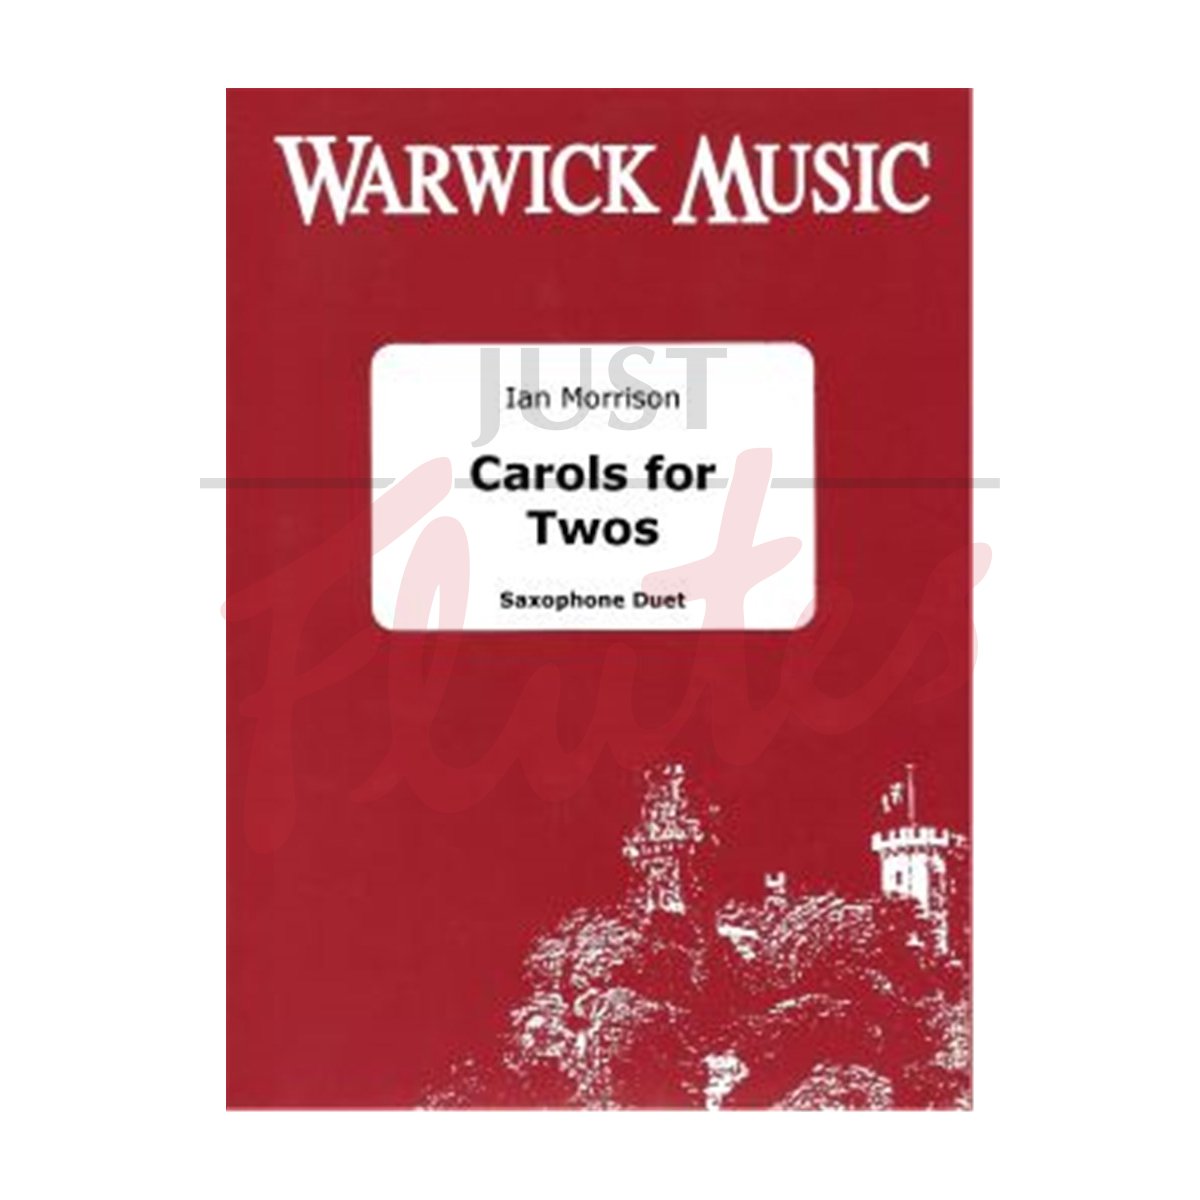 Carols for Twos for Saxophone Duet